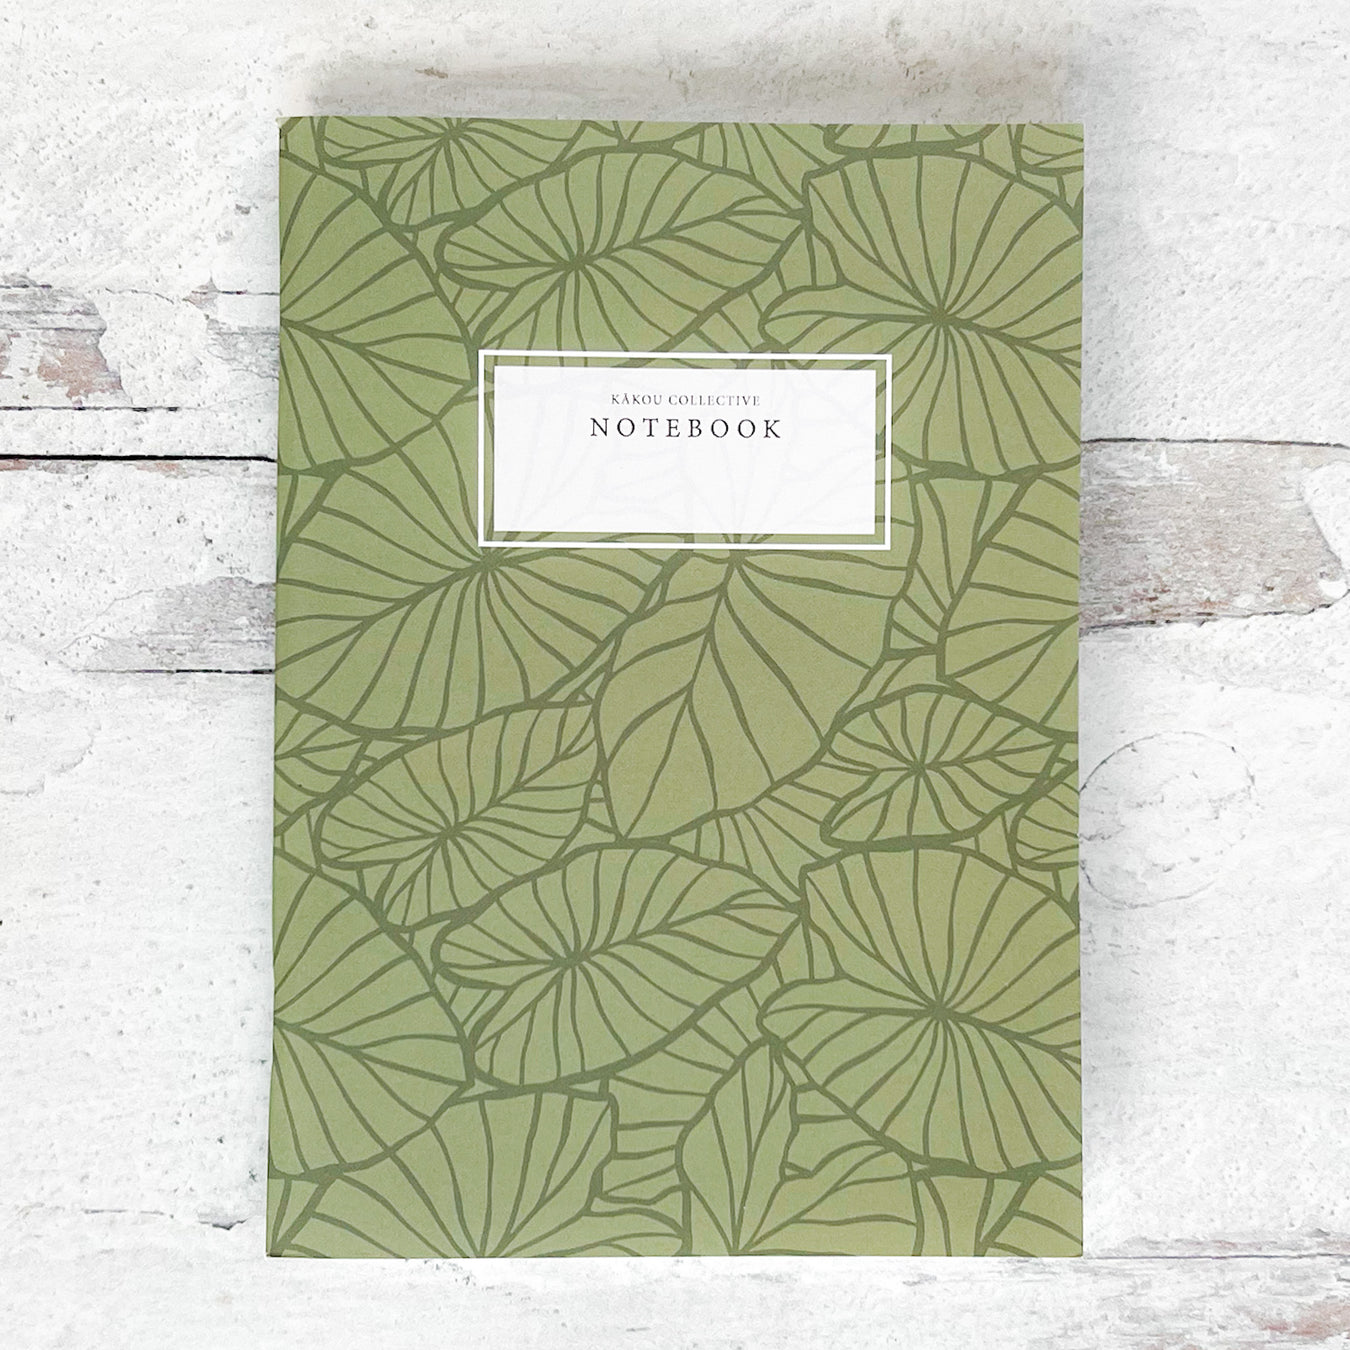 Kakou Collective Made in Hawaii Notebook